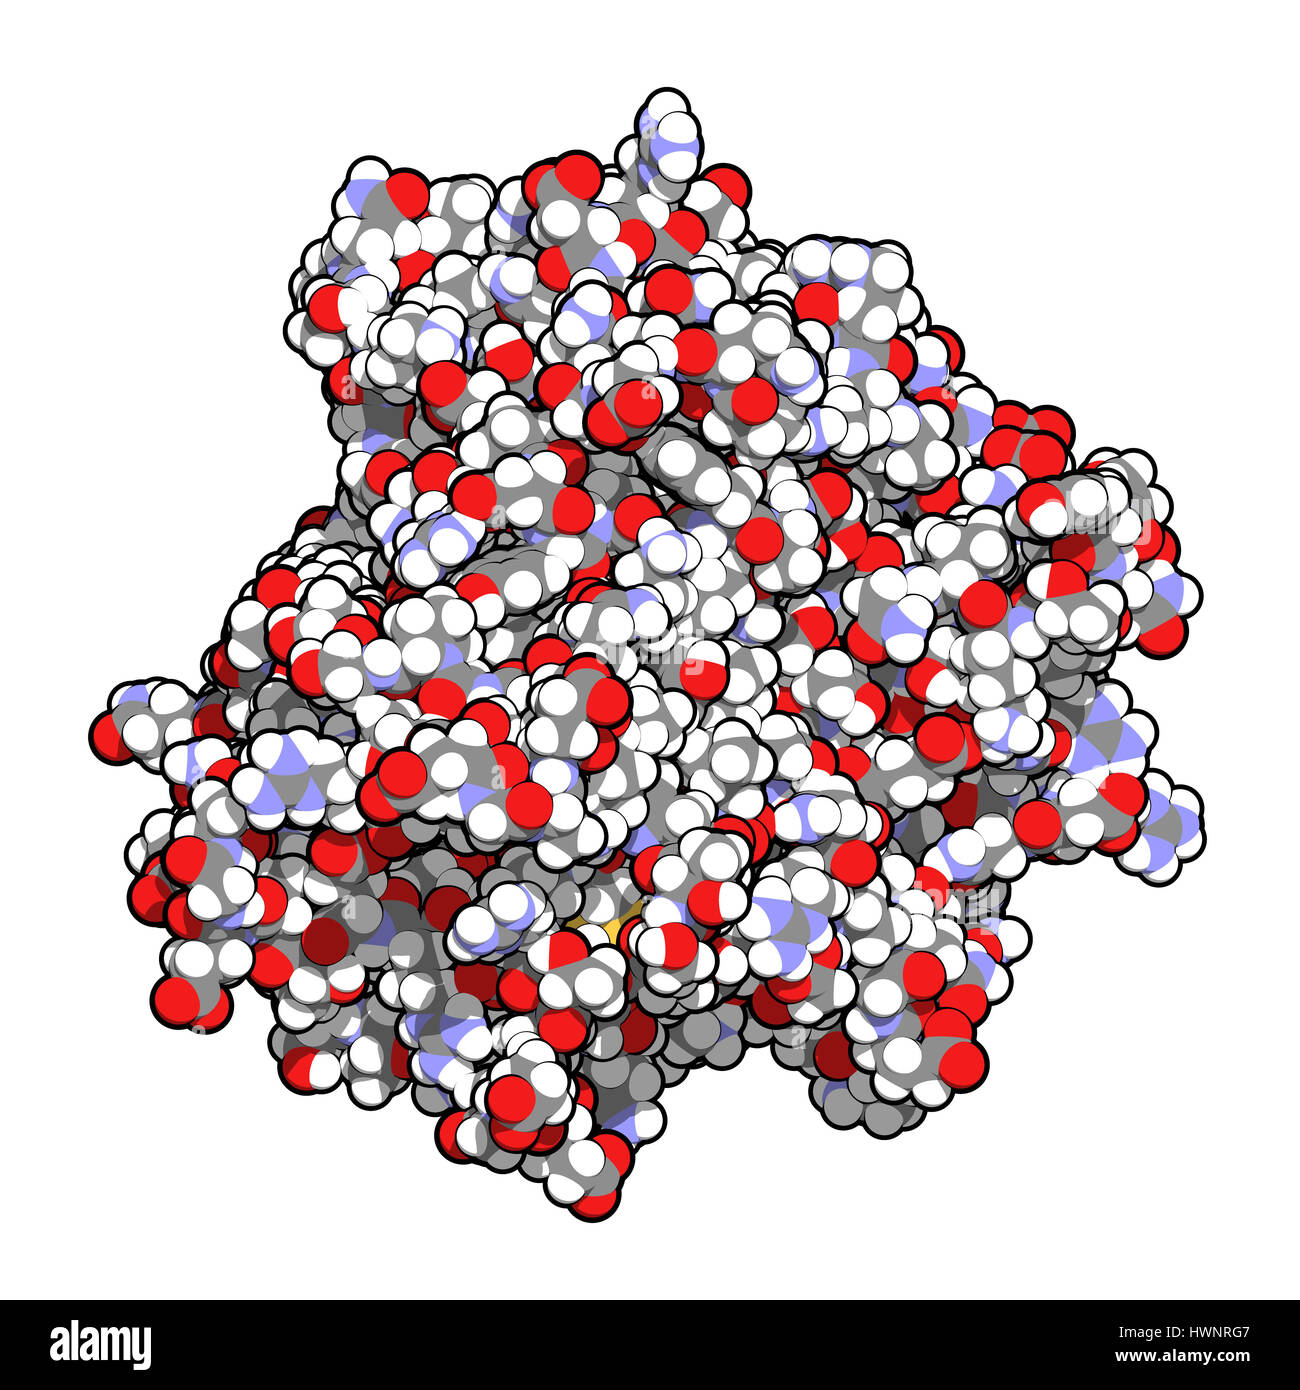 Tumor necrosis factor alpha (TNF) cytokine protein molecule, 3D rendering. Clinically used inhibitors include infliximab, adalimumab, certolizumab and Stock Photo